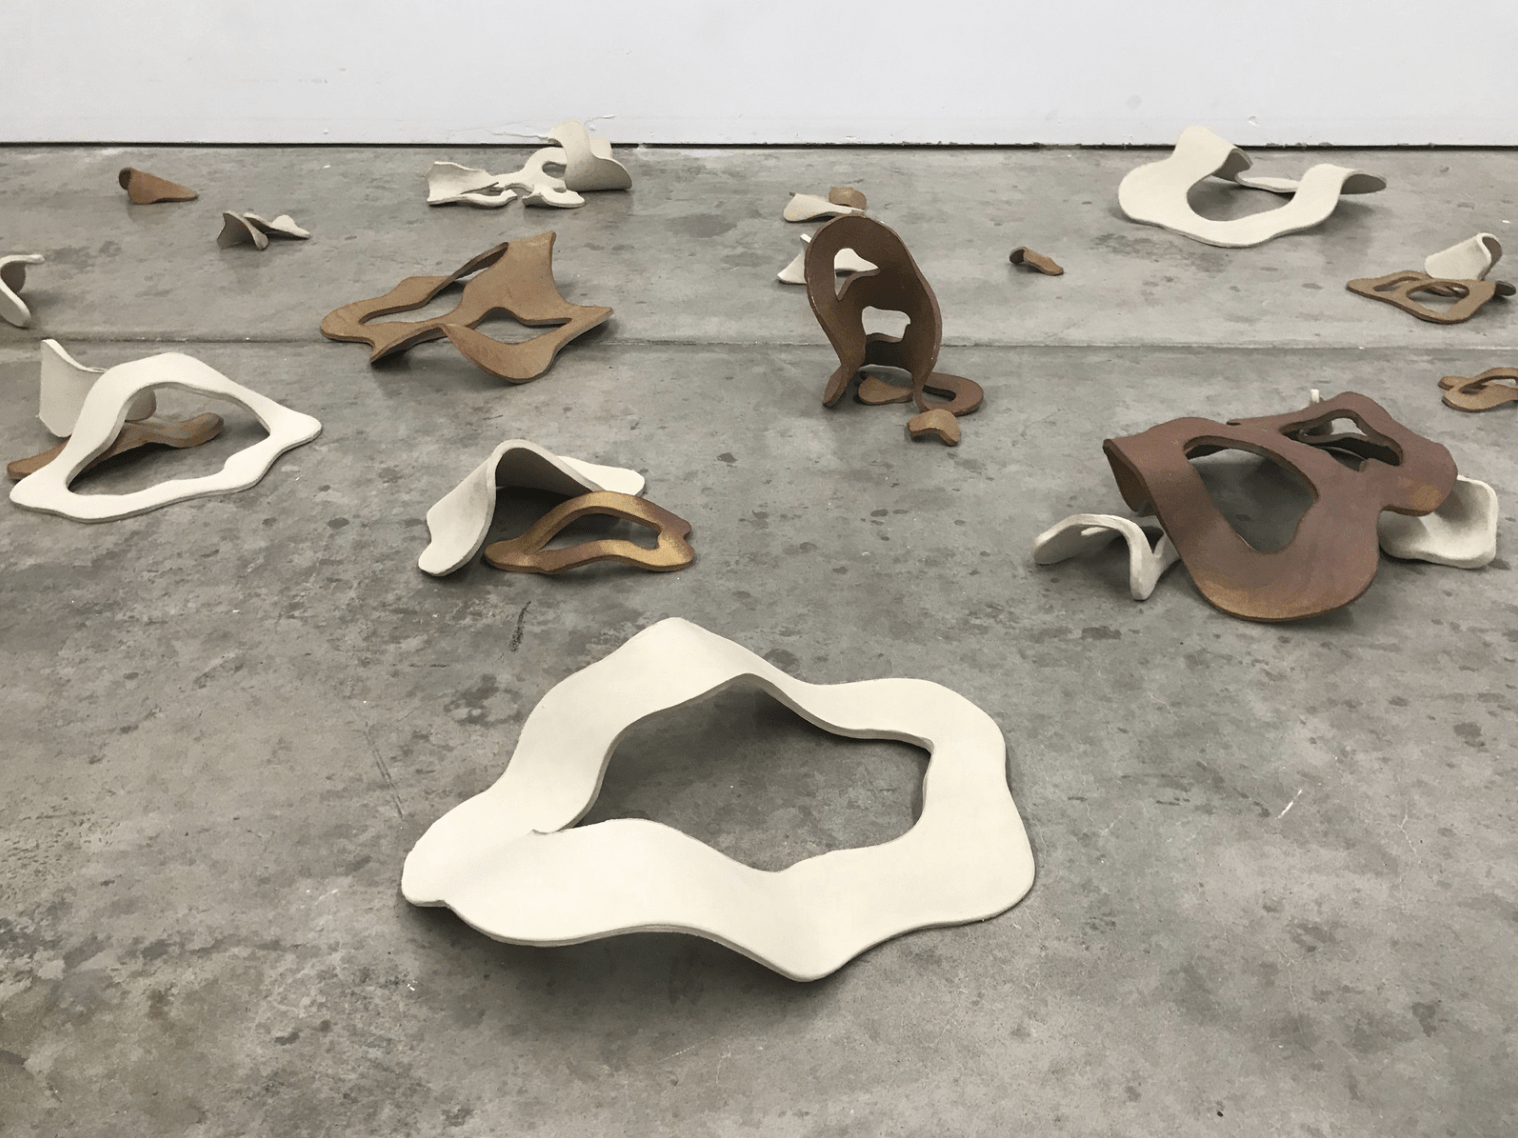 Wavy white, tan, and brown sculptural forms sit on a concrete floor.